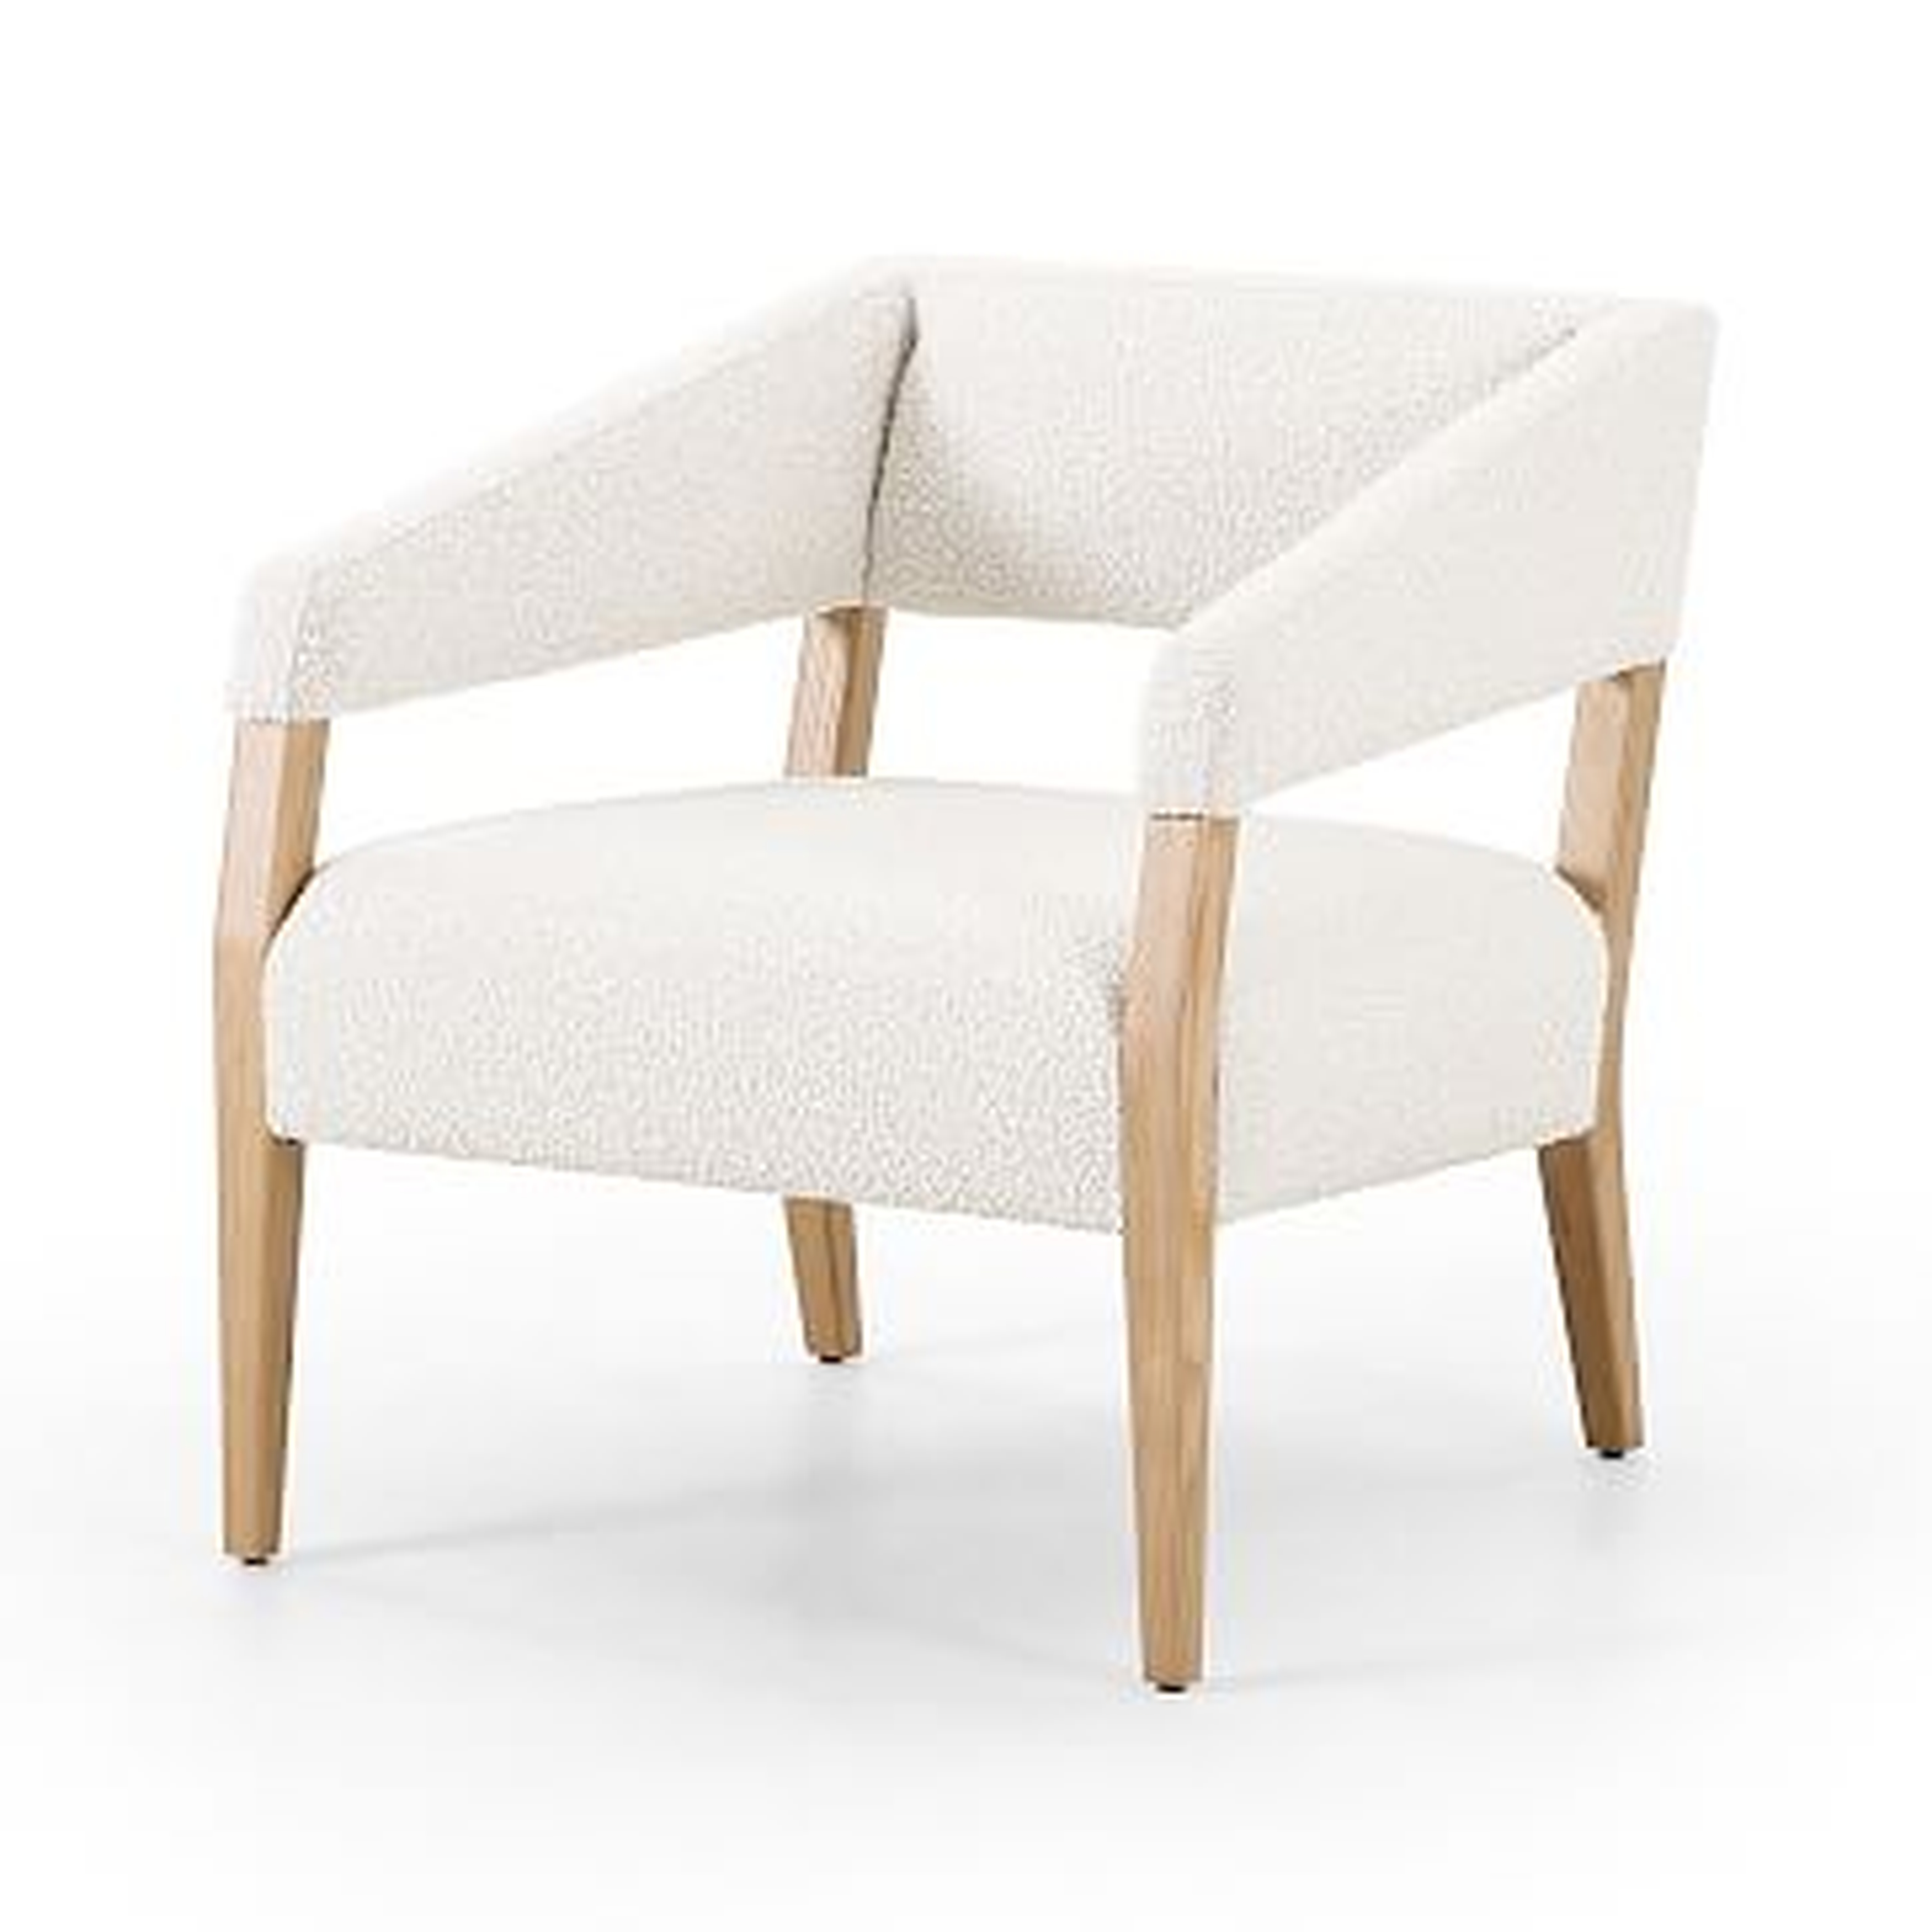 Angled Arm Club Chair, Knoll Natural, Blonde Ash - West Elm